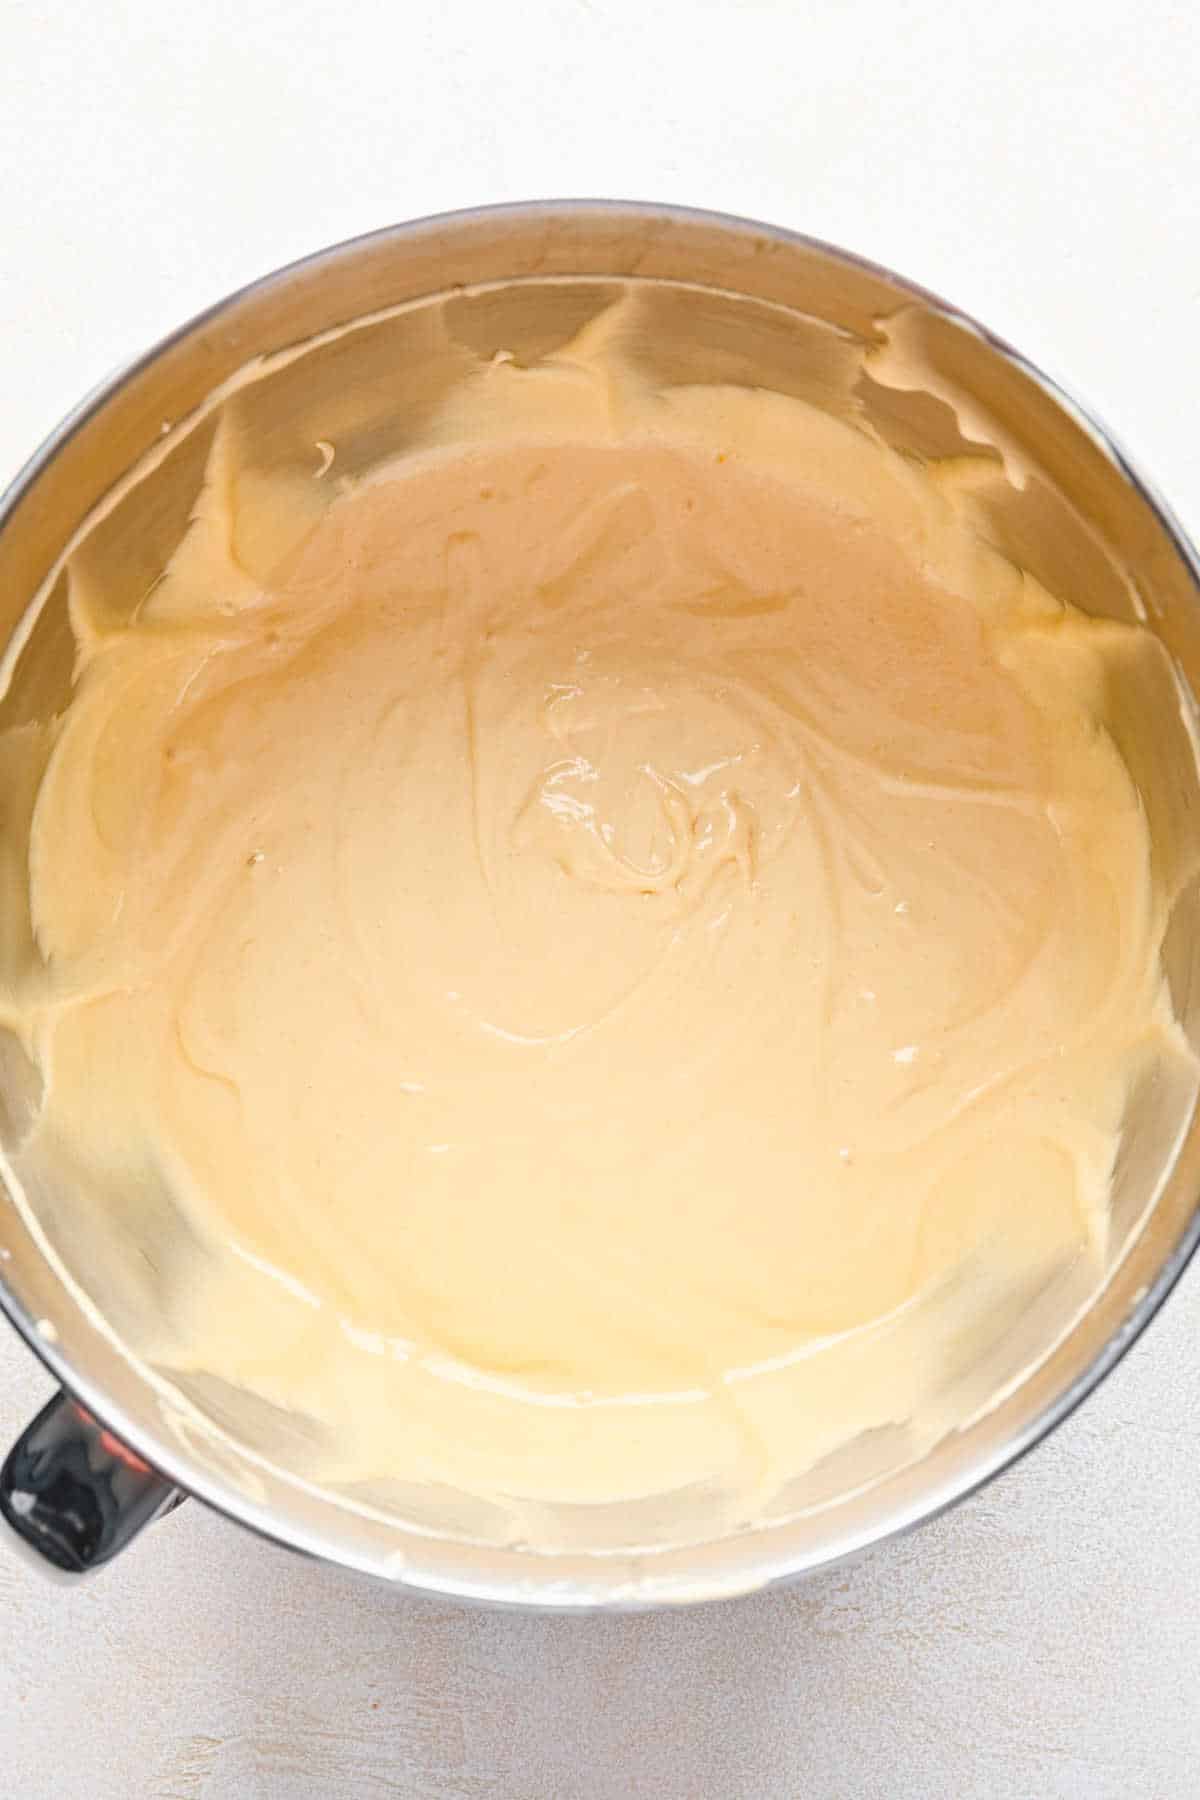 Yellow cake batter in a silver mixing bowl. 